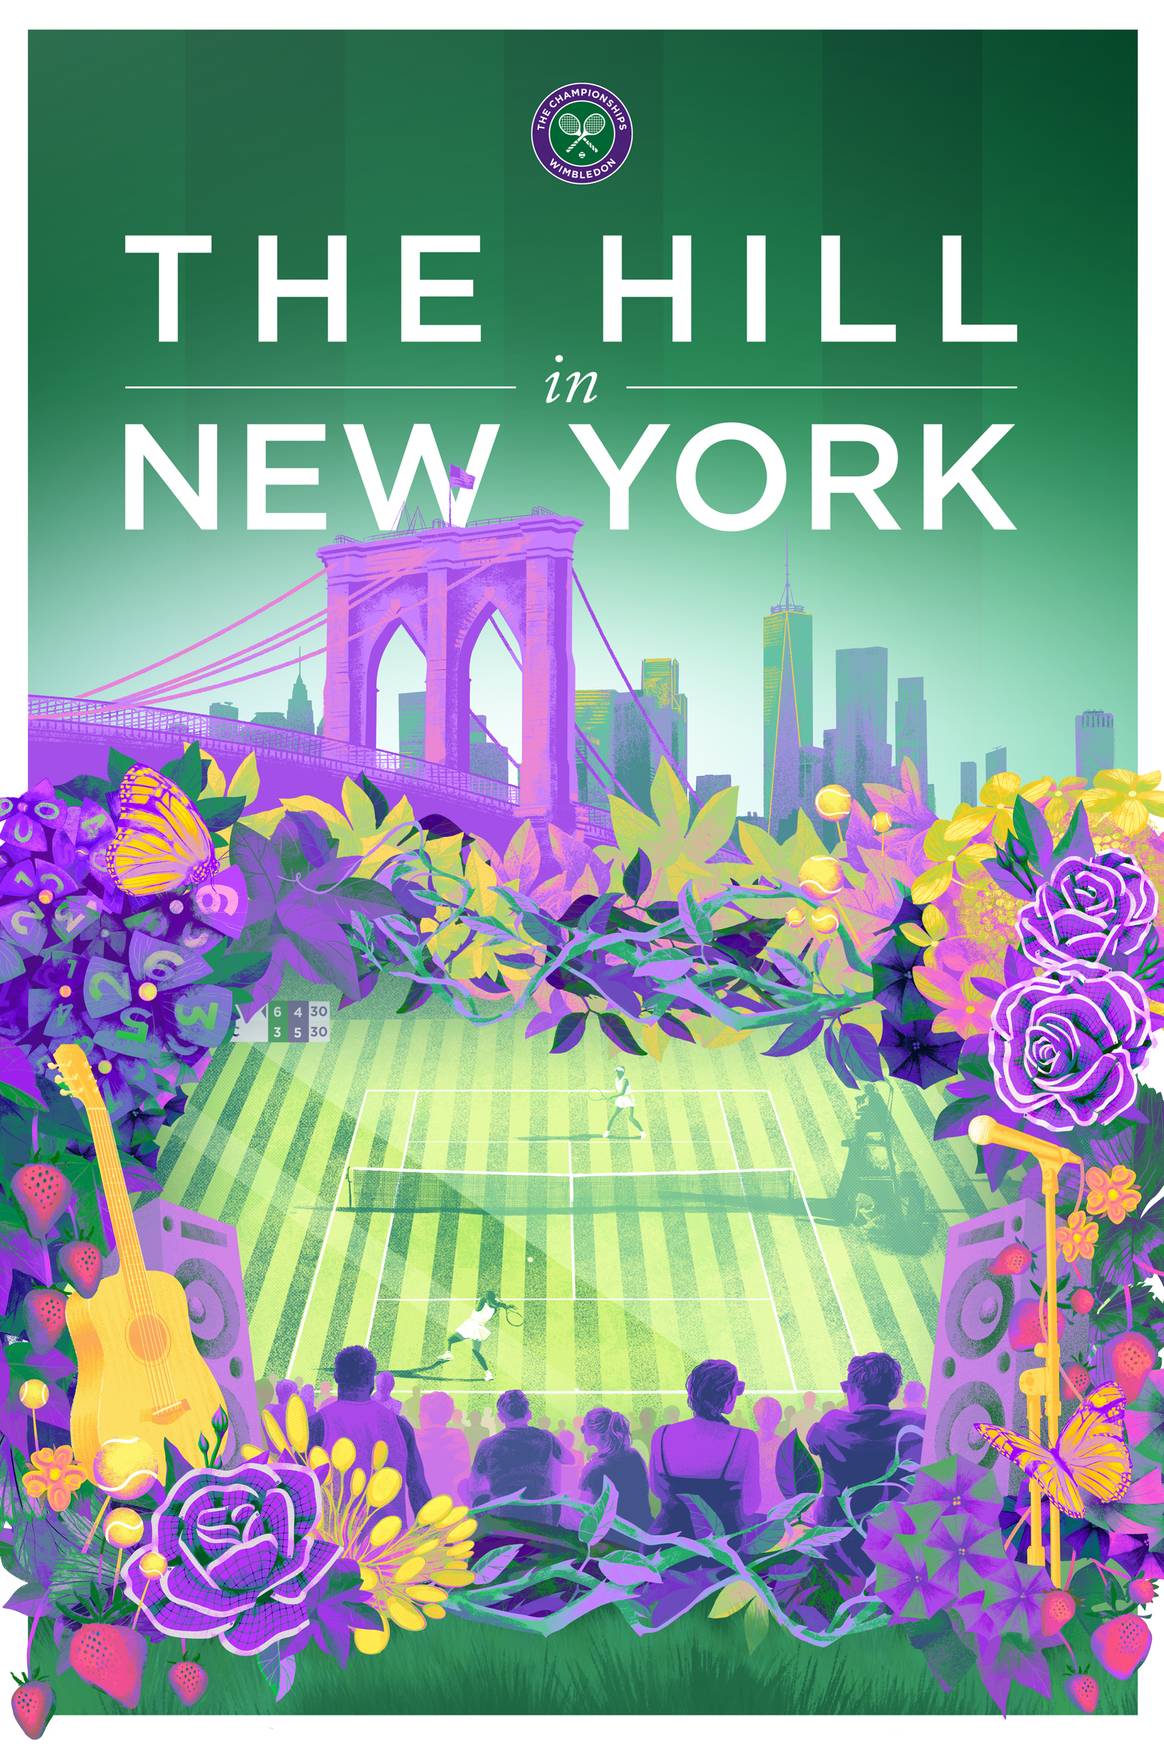 Wimbledon ‘The Hill in New York’ event poster